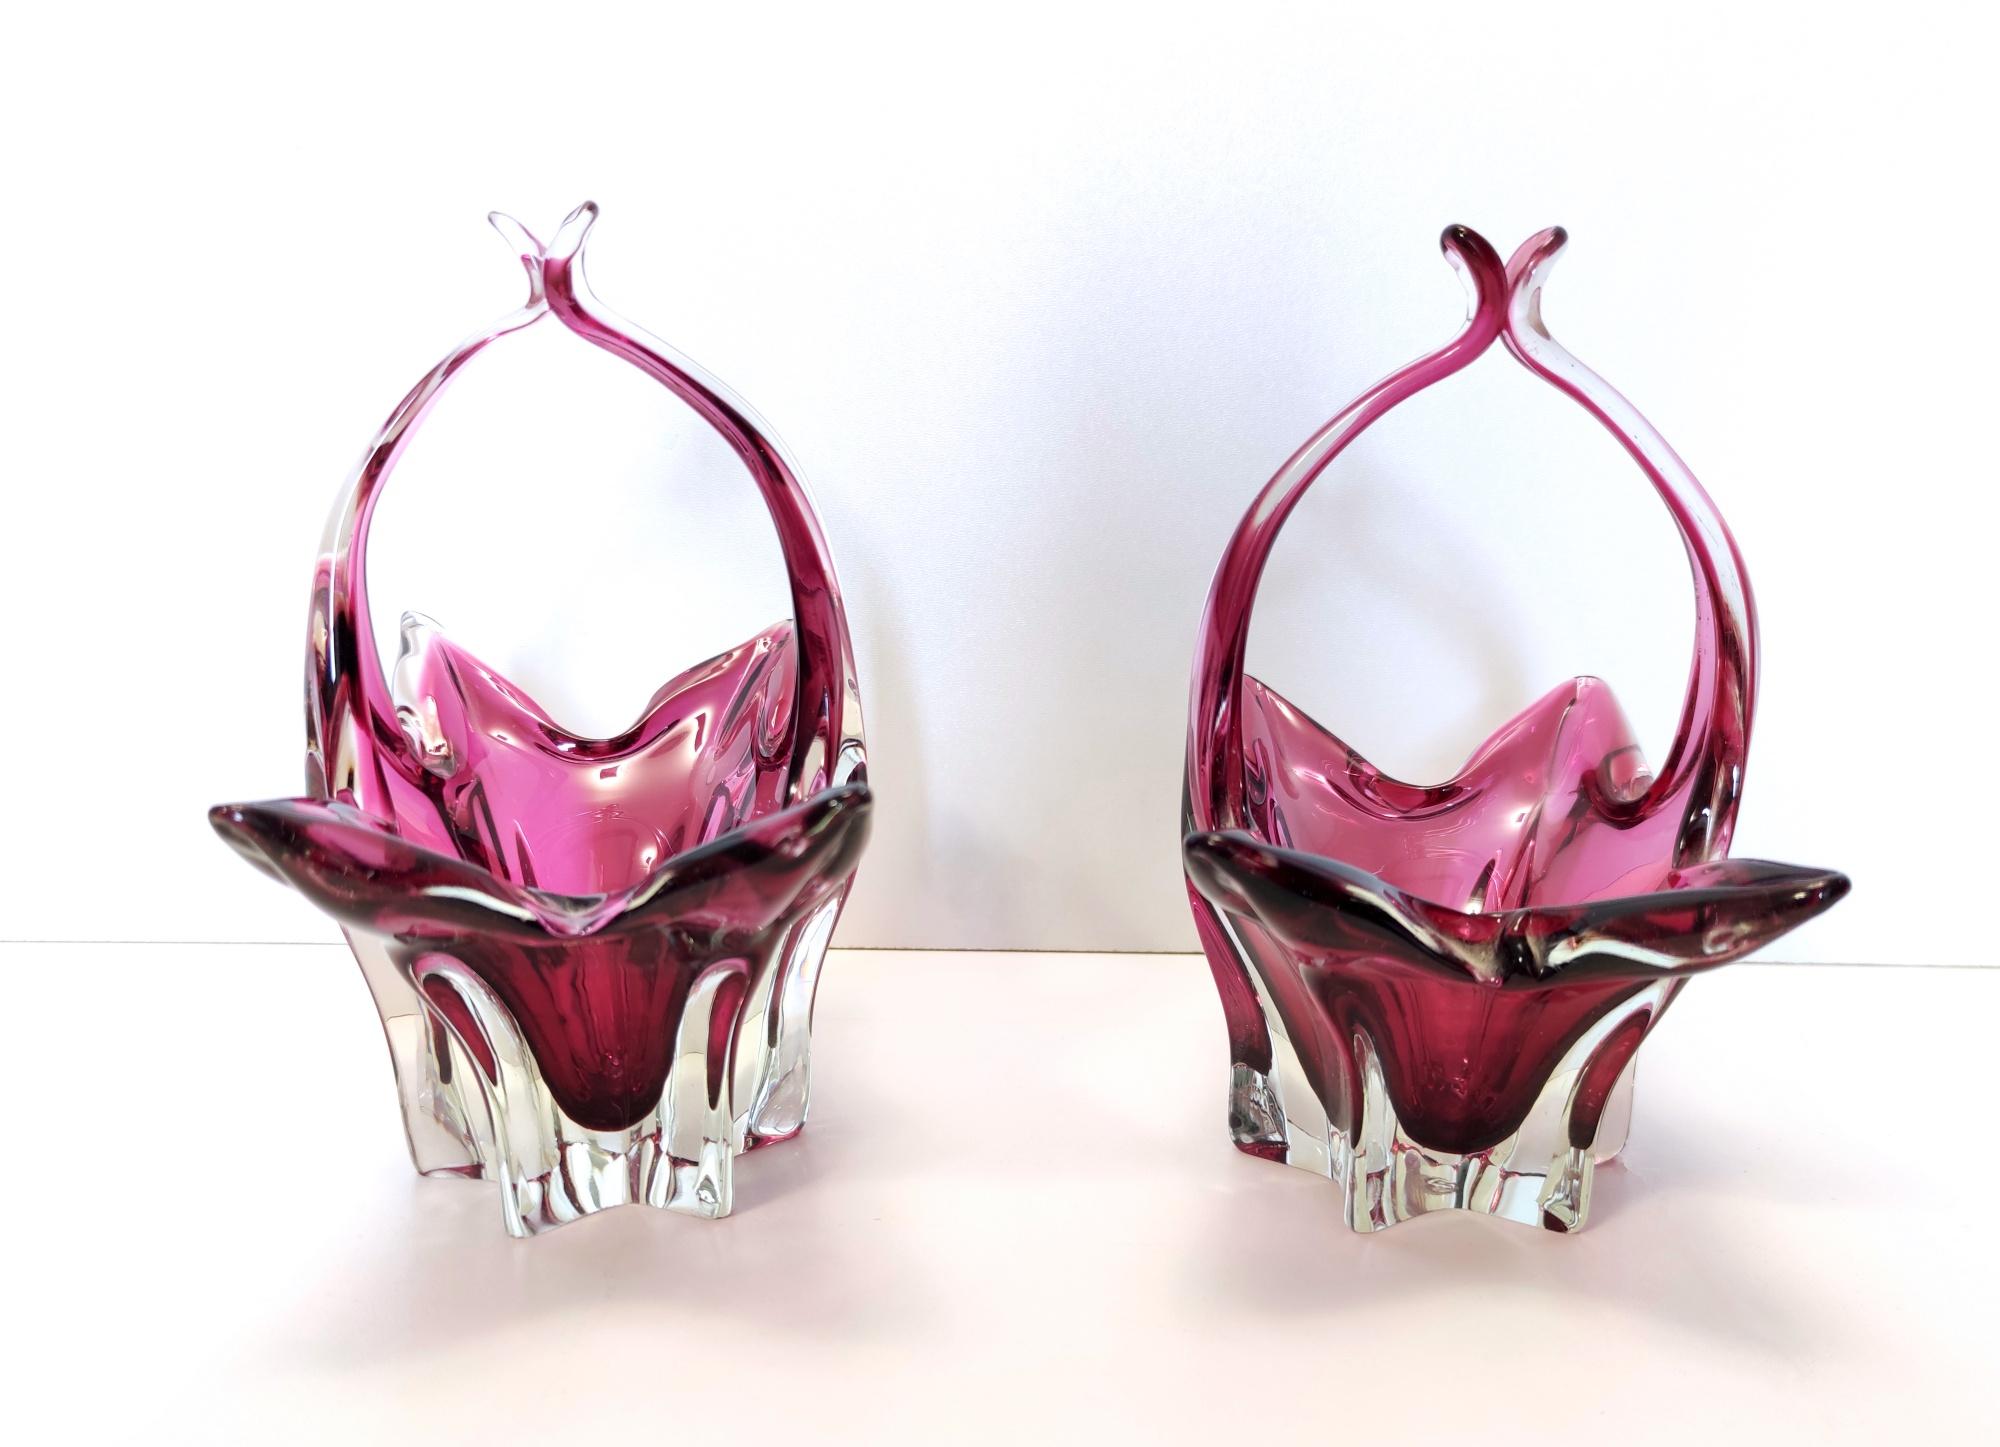 Pair of Vintage Pink Murano Glass Bonbonnières / Trinket Bowls, Italy In Excellent Condition For Sale In Bresso, Lombardy